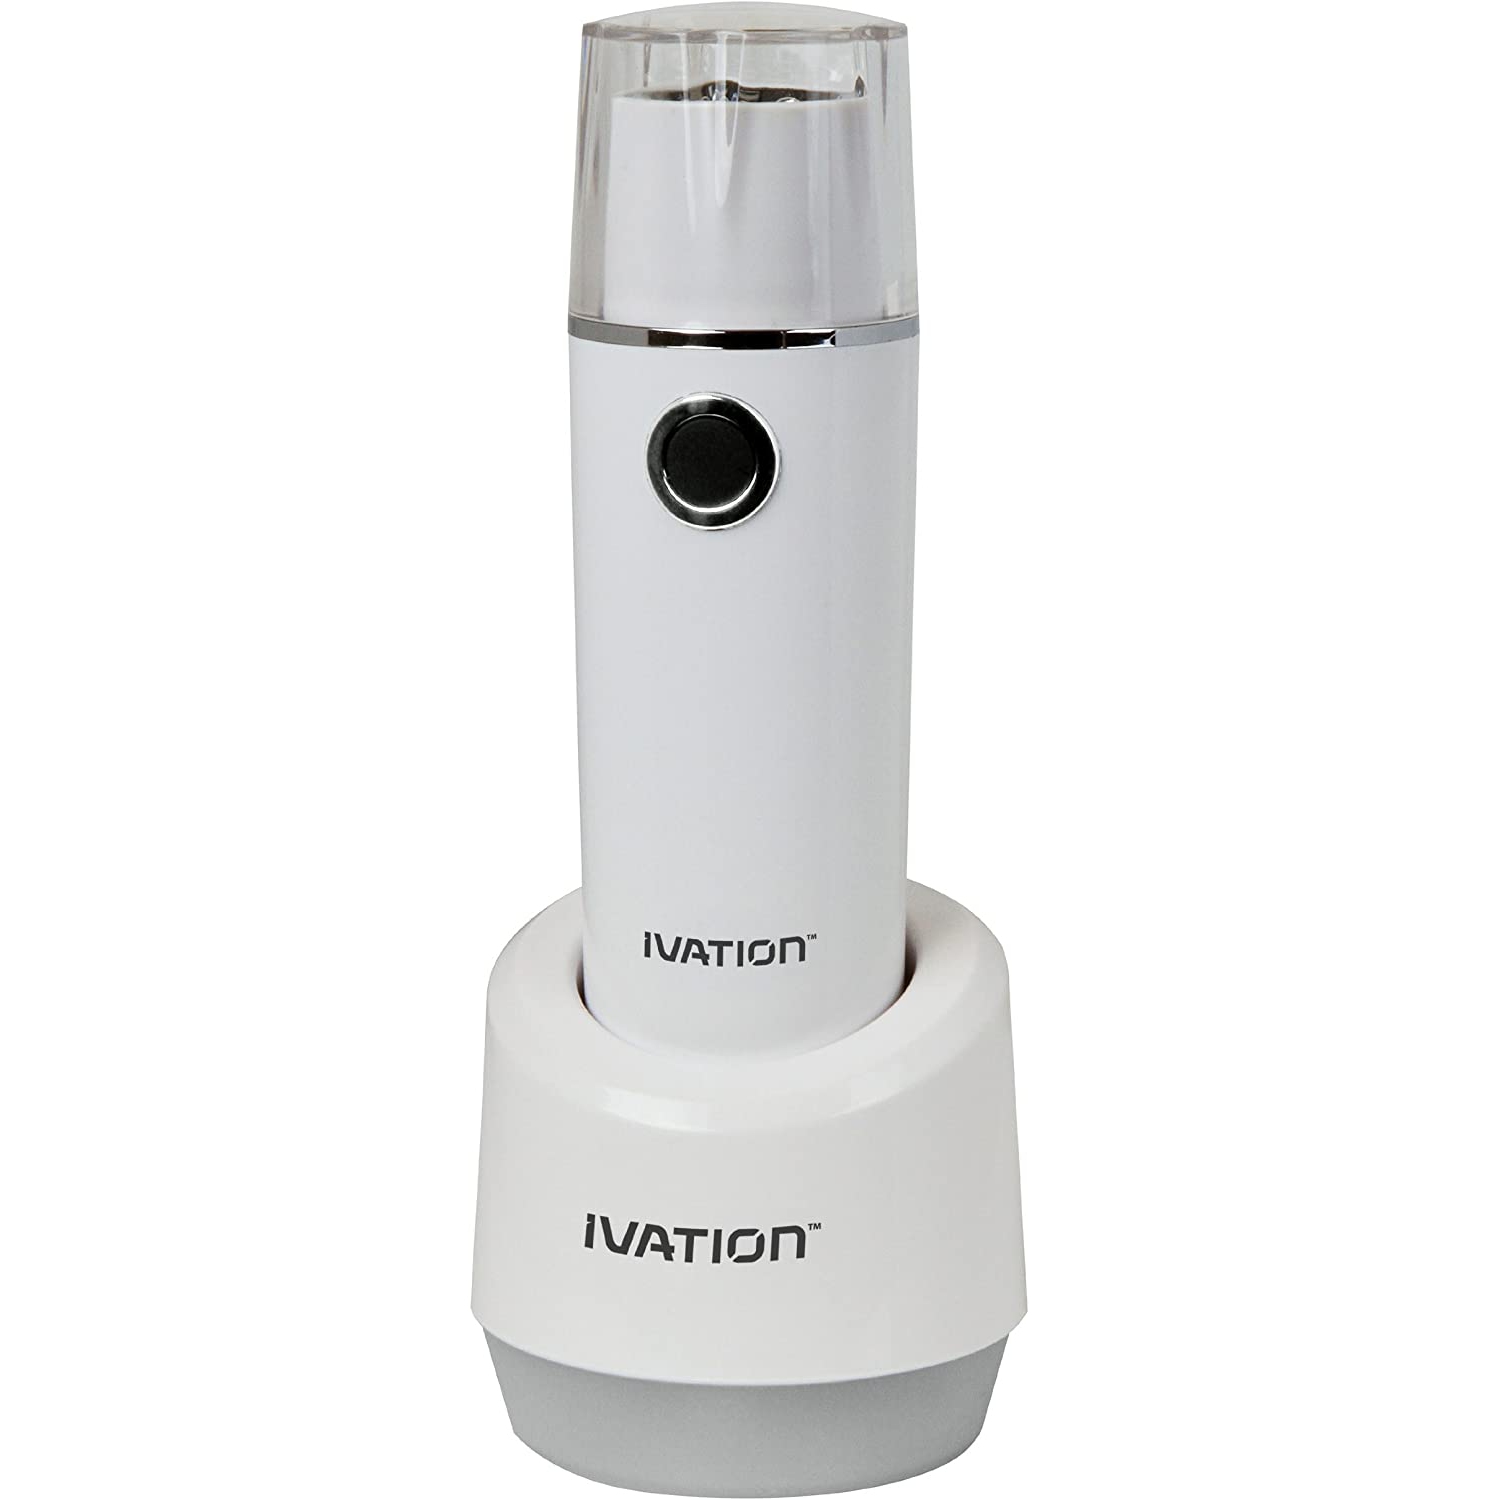 Ivation Emergency Automatic Power Failure 6-LED Light - Rechargeable Lithium Ion battery - Mufti-Functions Include: Power Failure Blackout light, Handheld Flash-Light (Lasts for 9 Hours), Sensor Night